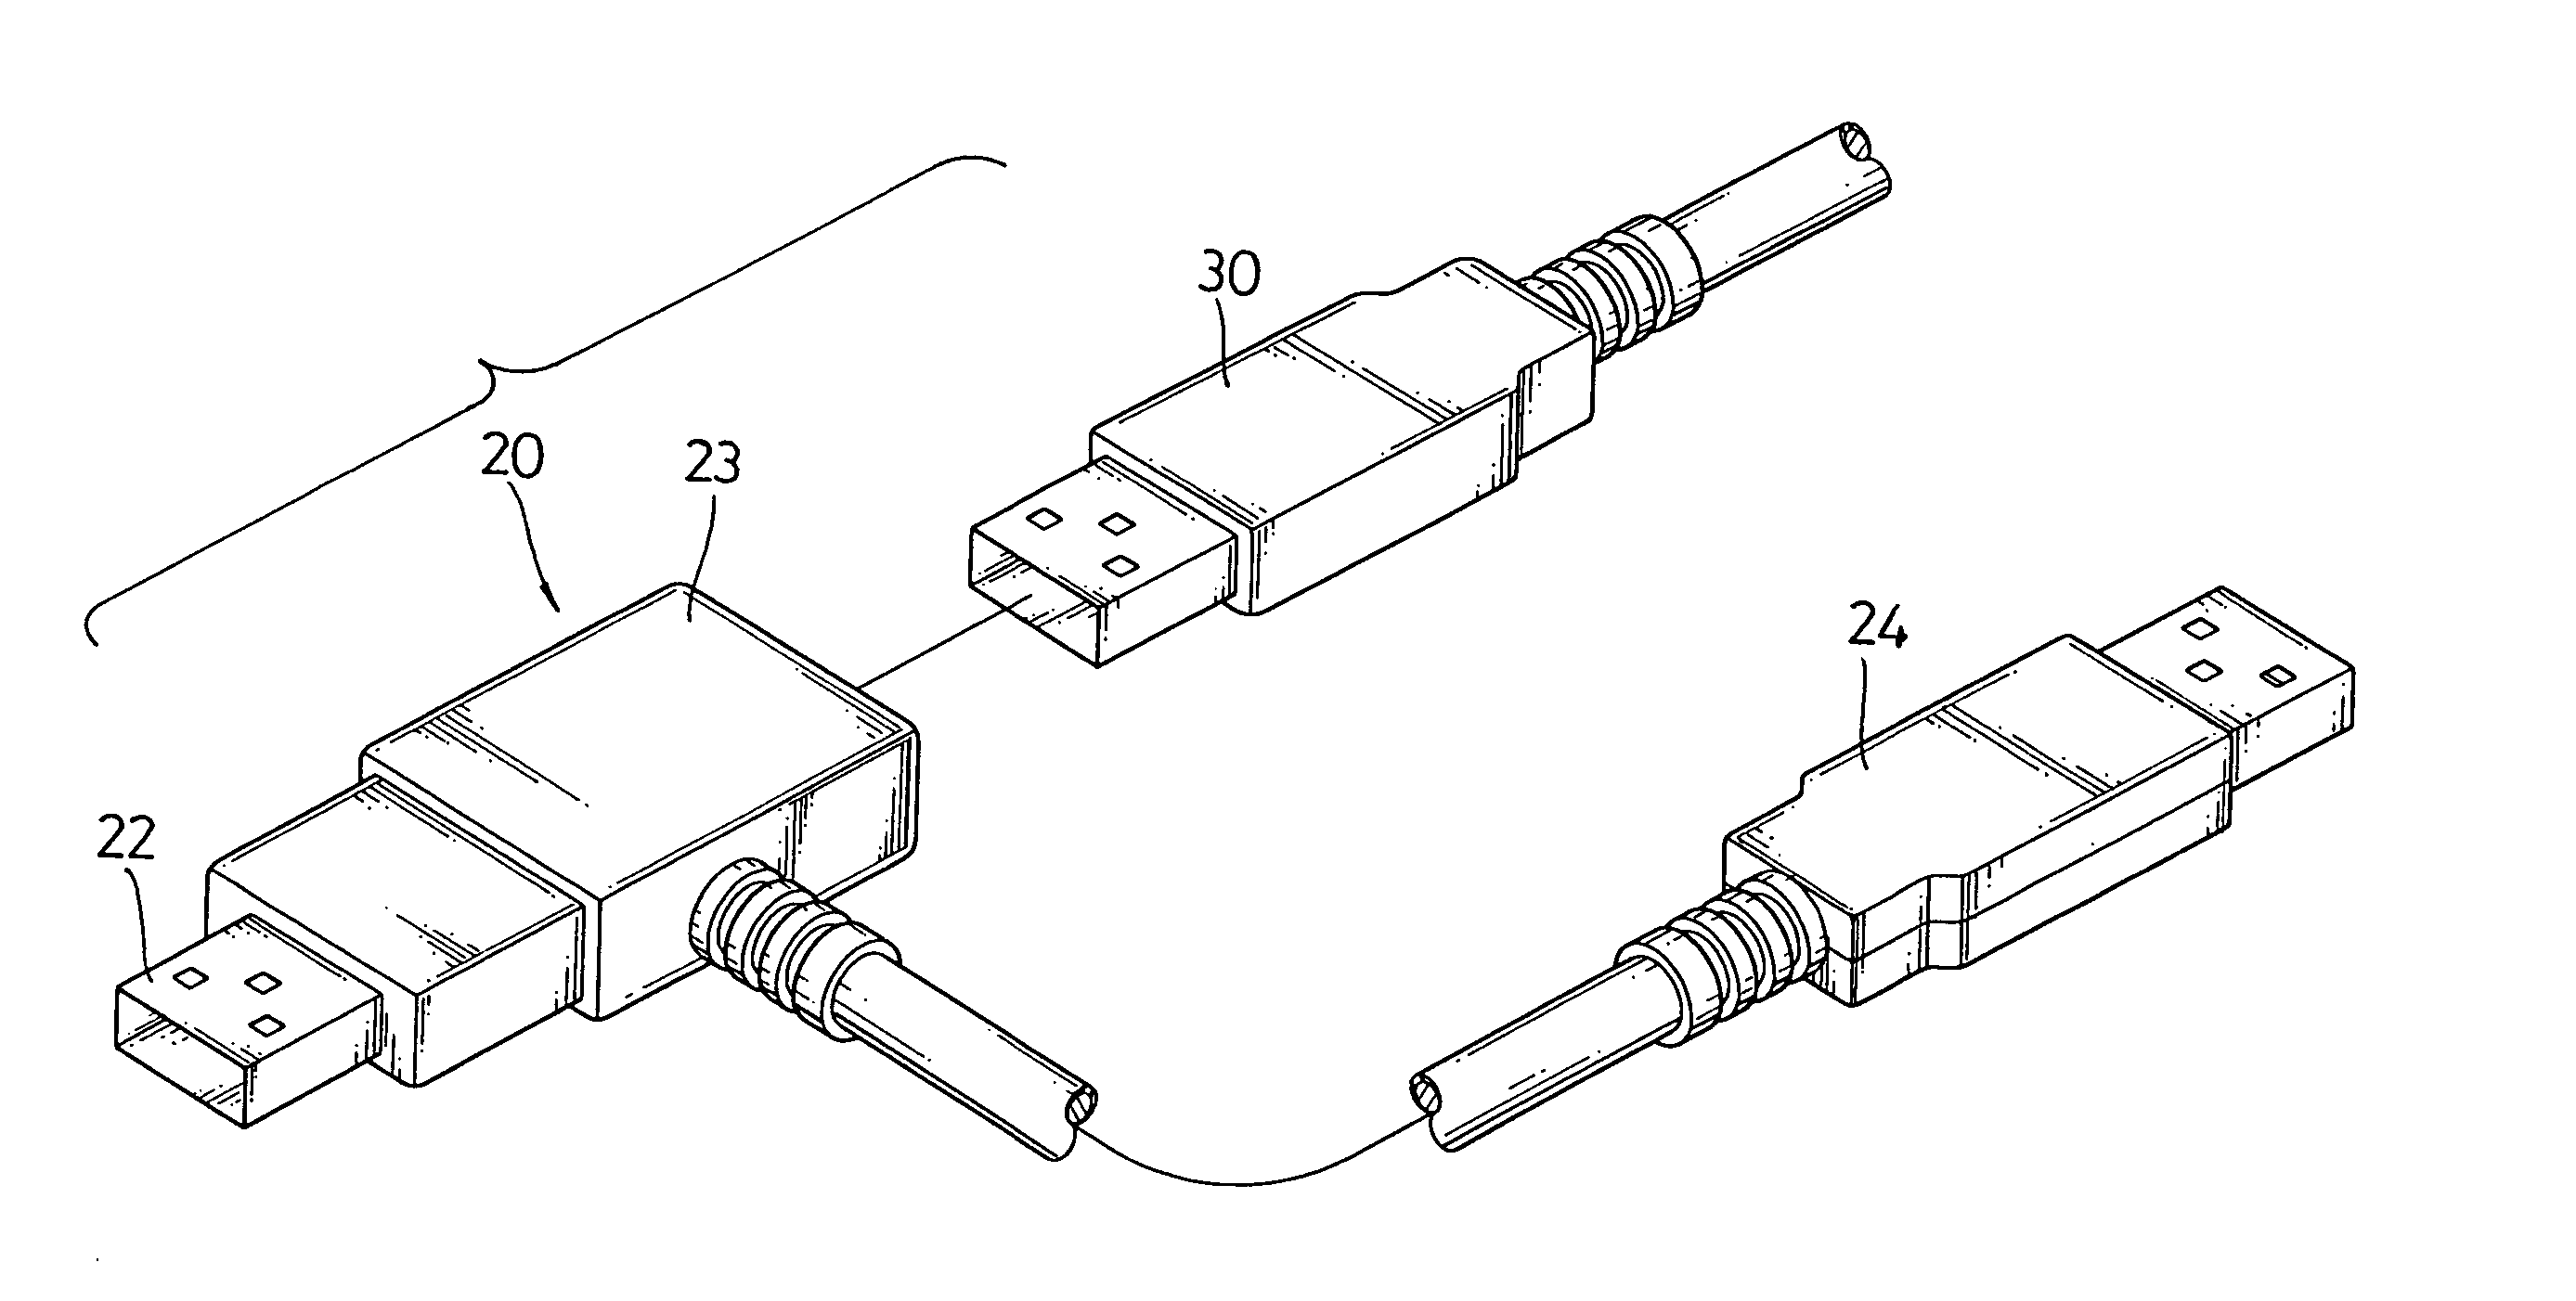 USB adapter with a power connector